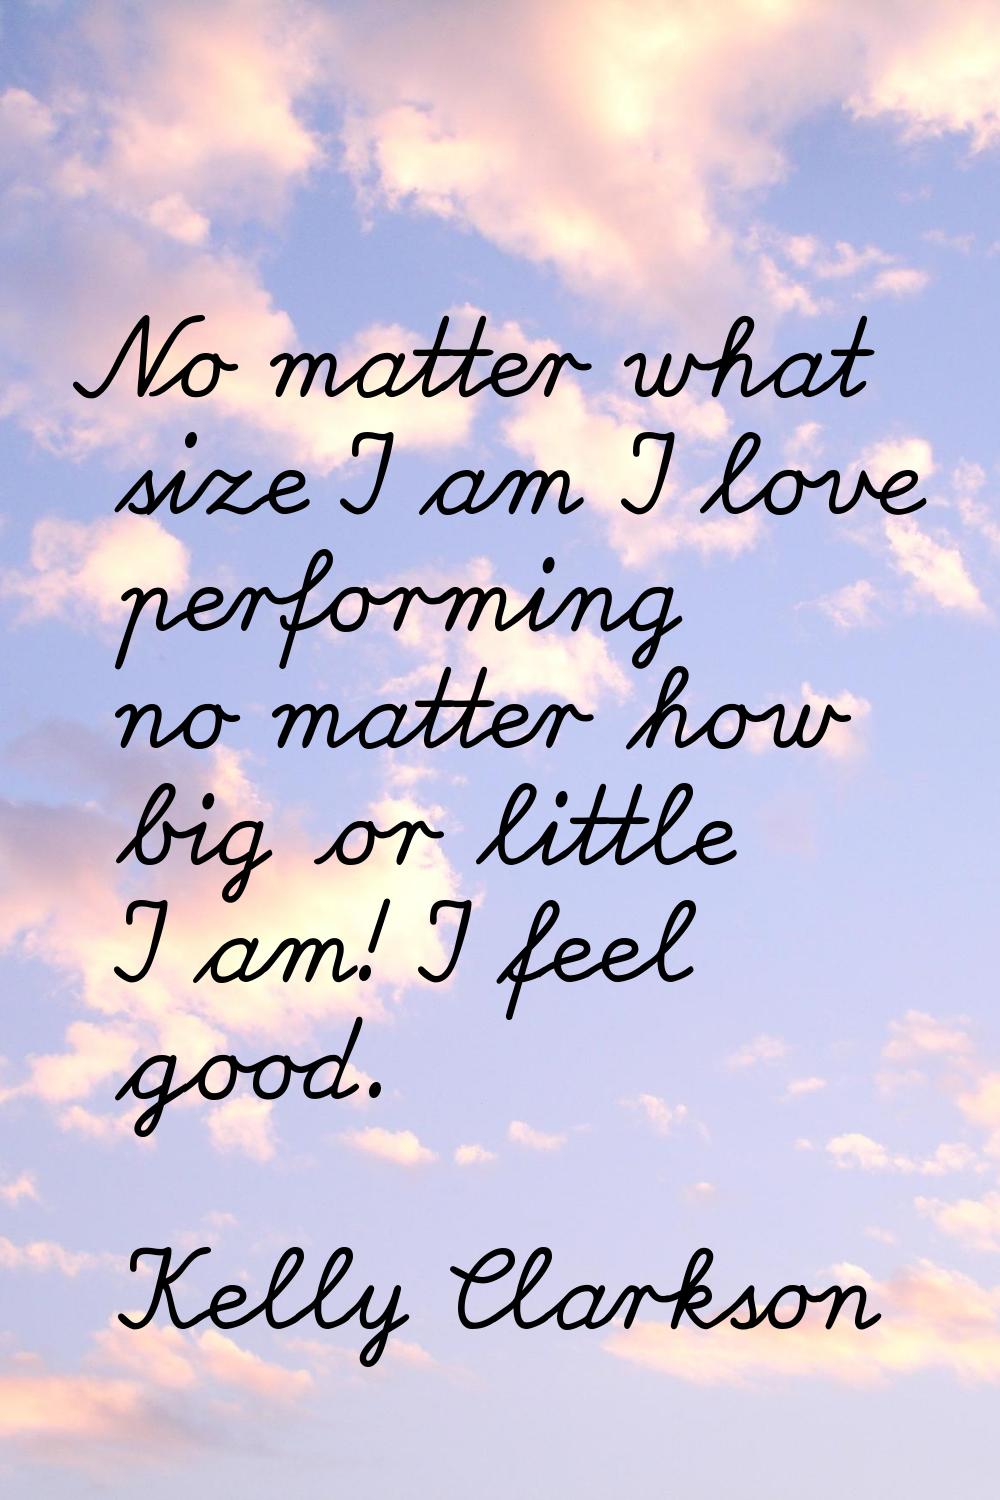 No matter what size I am I love performing no matter how big or little I am! I feel good.